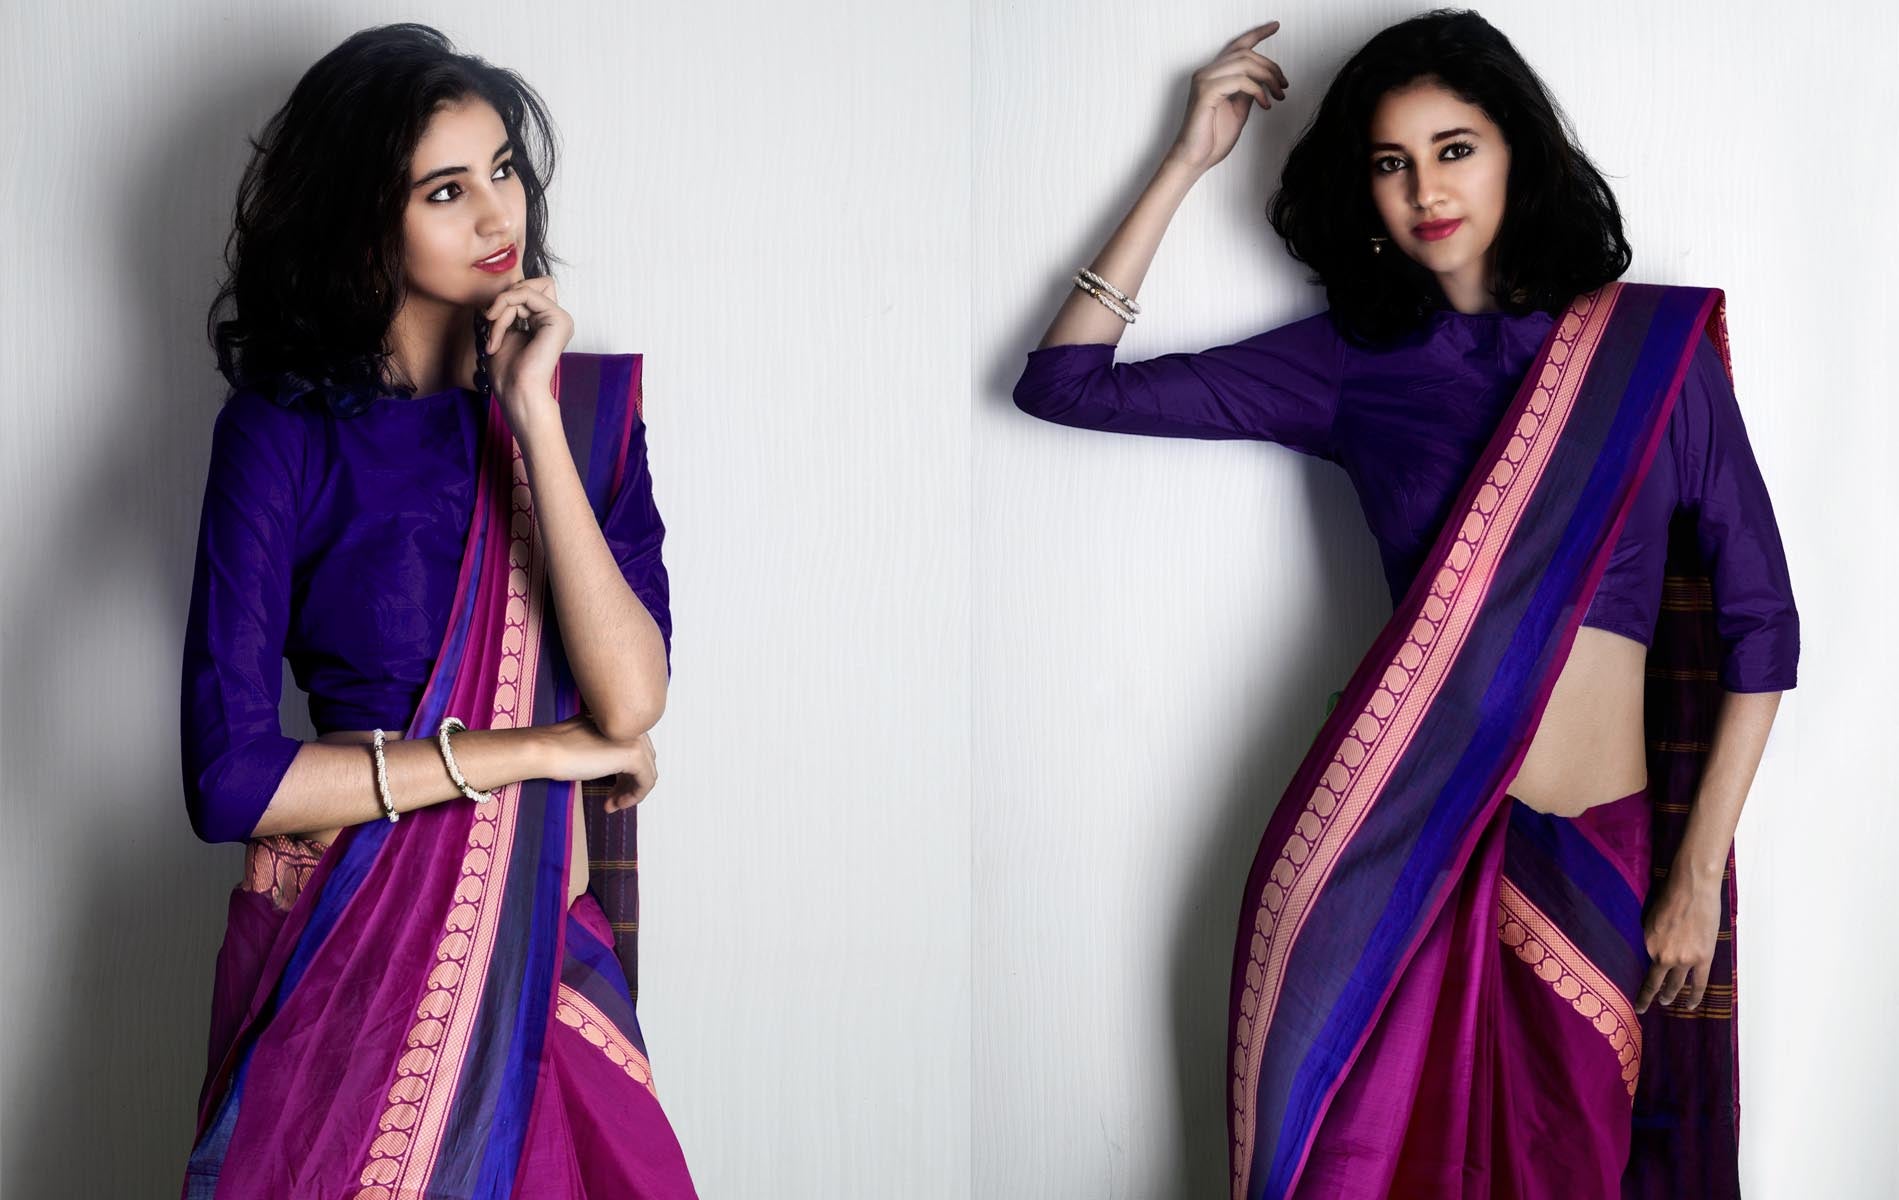 Are you looking for the All Time classic South Handloom Cottons? – Then Chettinad Handloom Sarees are just for you